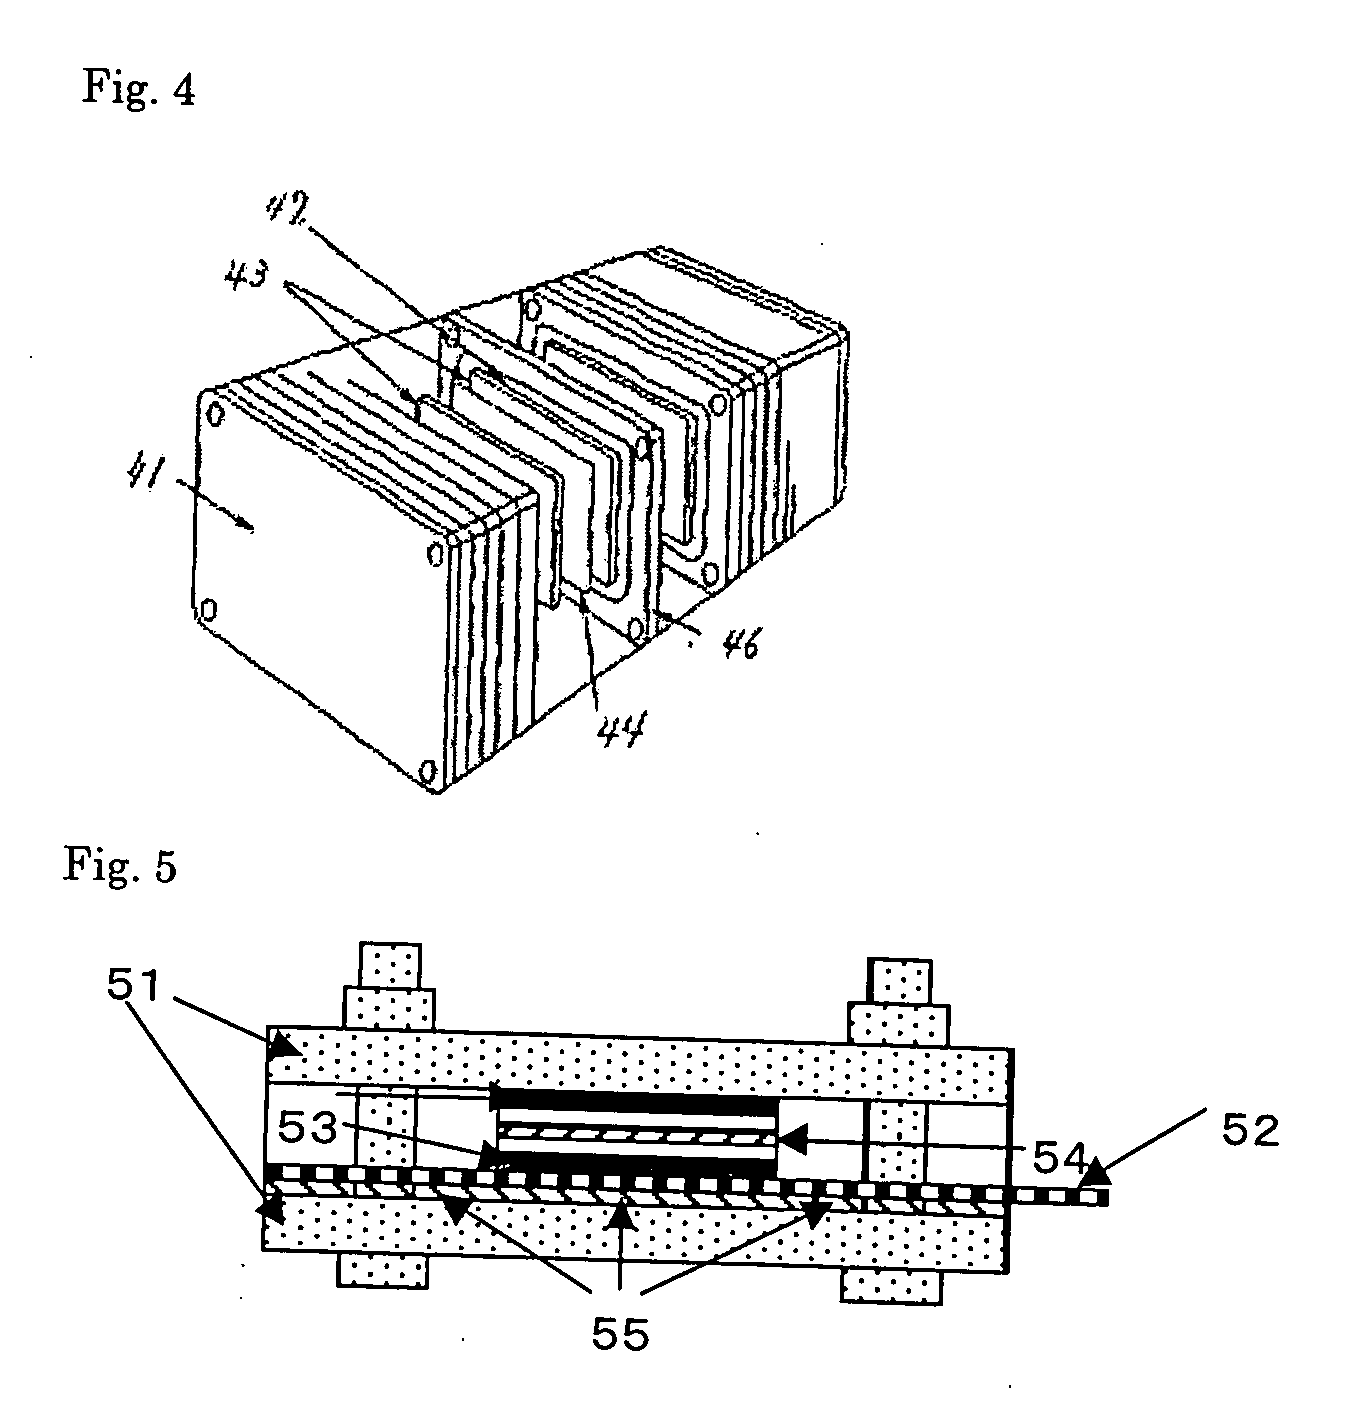 Electric double layer capacitor